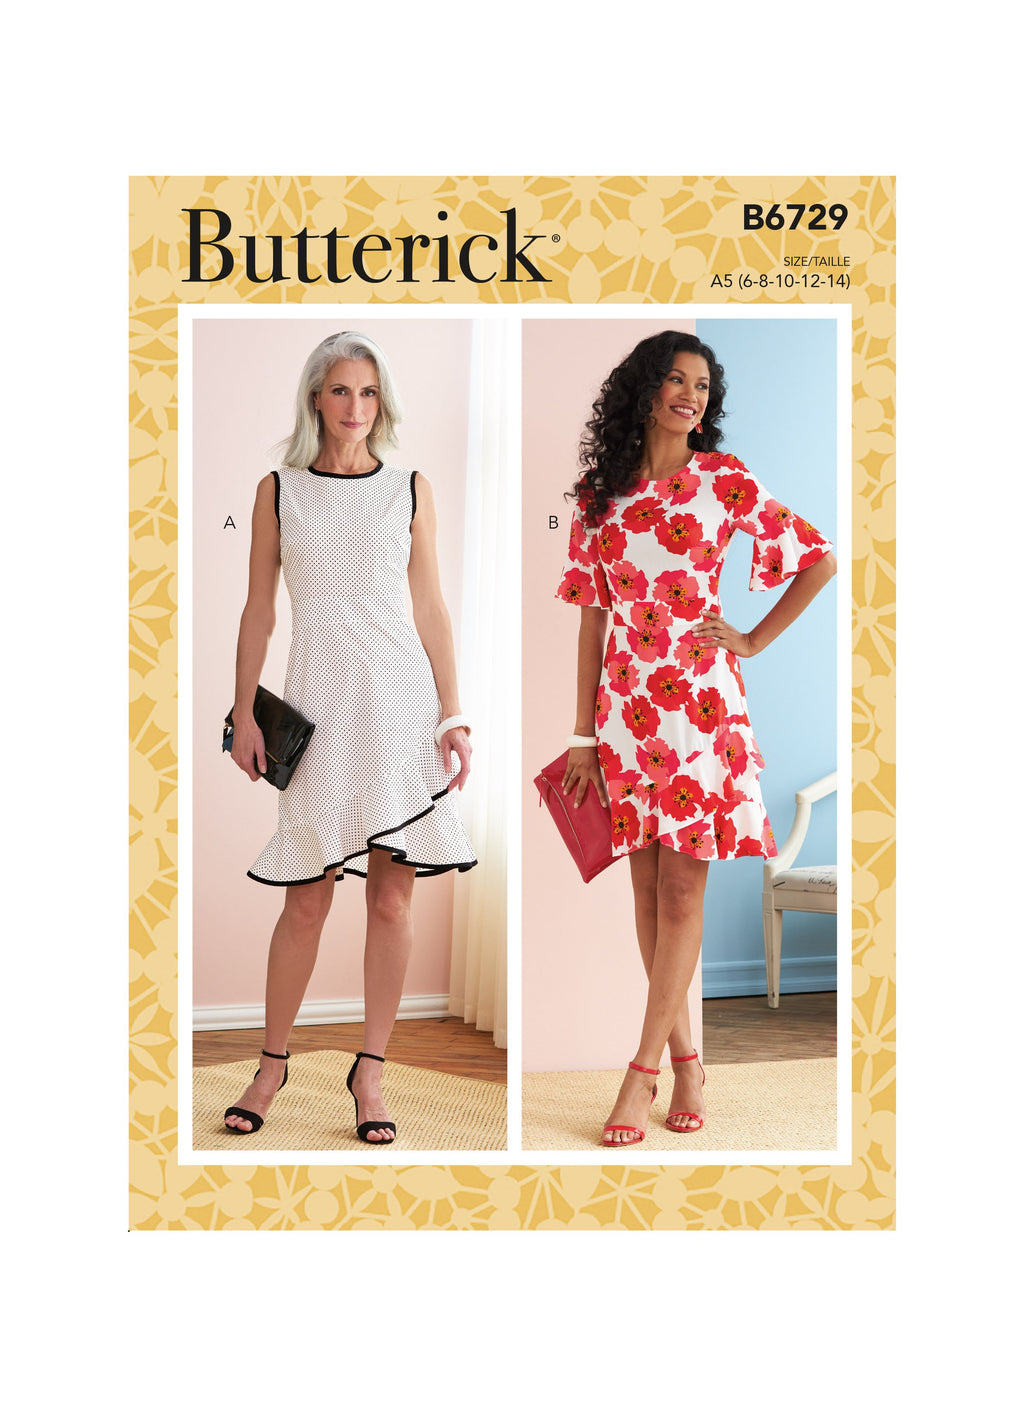 Butterick Sewing Pattern 6729 Misses' Dresses